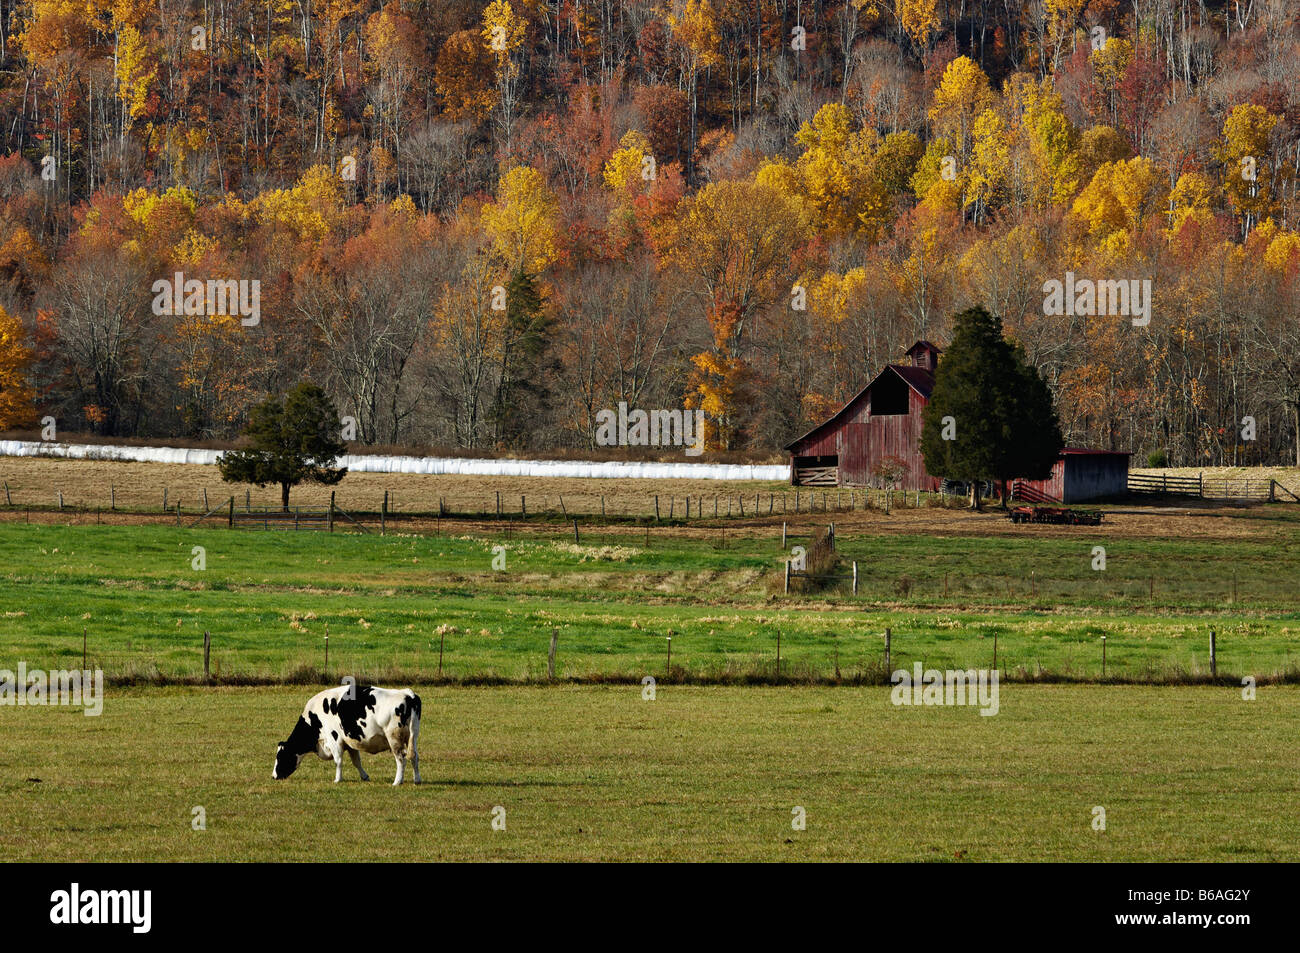 Red Barn Cattle and Autumn Hillside in Grassy Cove Cumberland County Tennessee Stock Photo